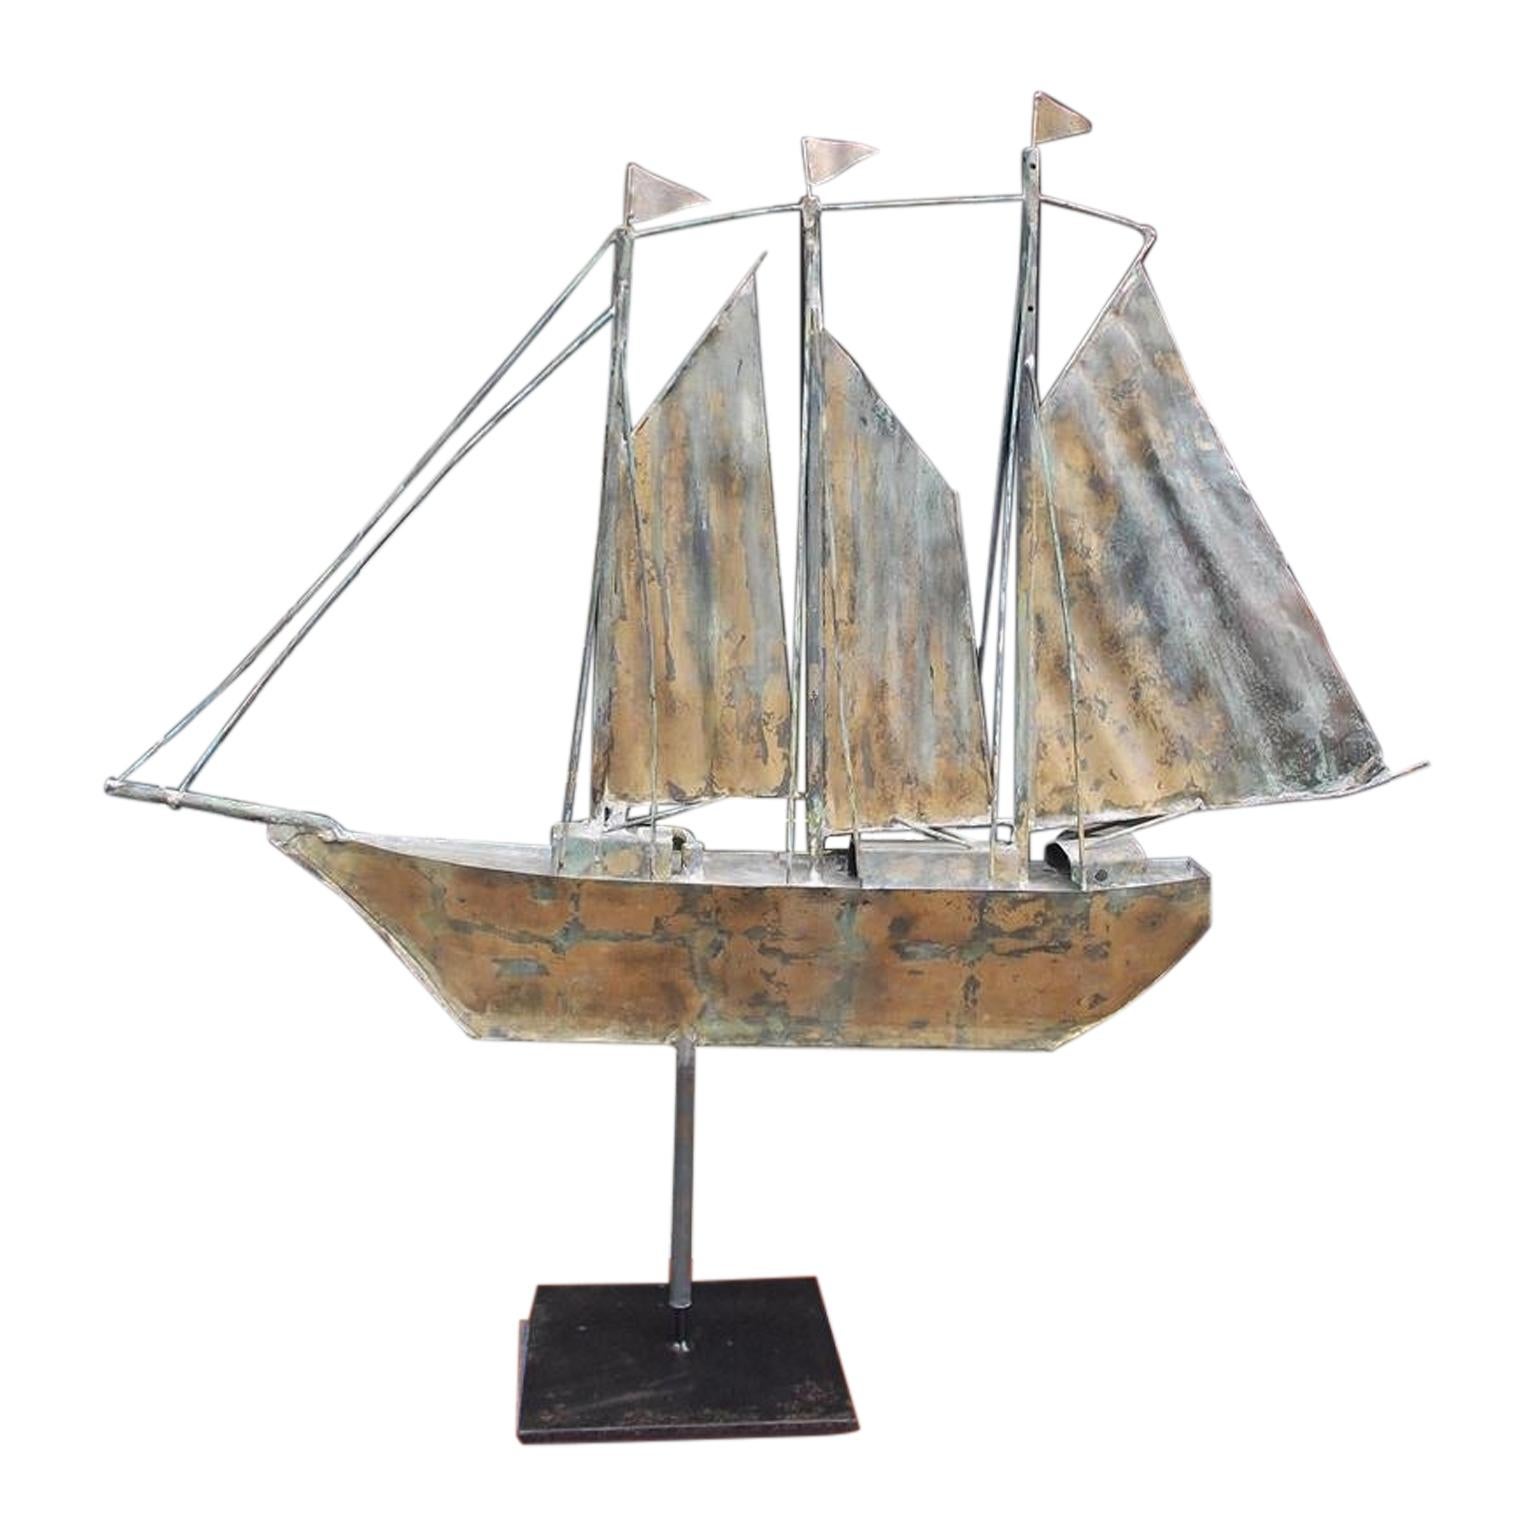 American Gilt Copper Three Masted Ship Weathervane Mounted on Stand, circa 1890